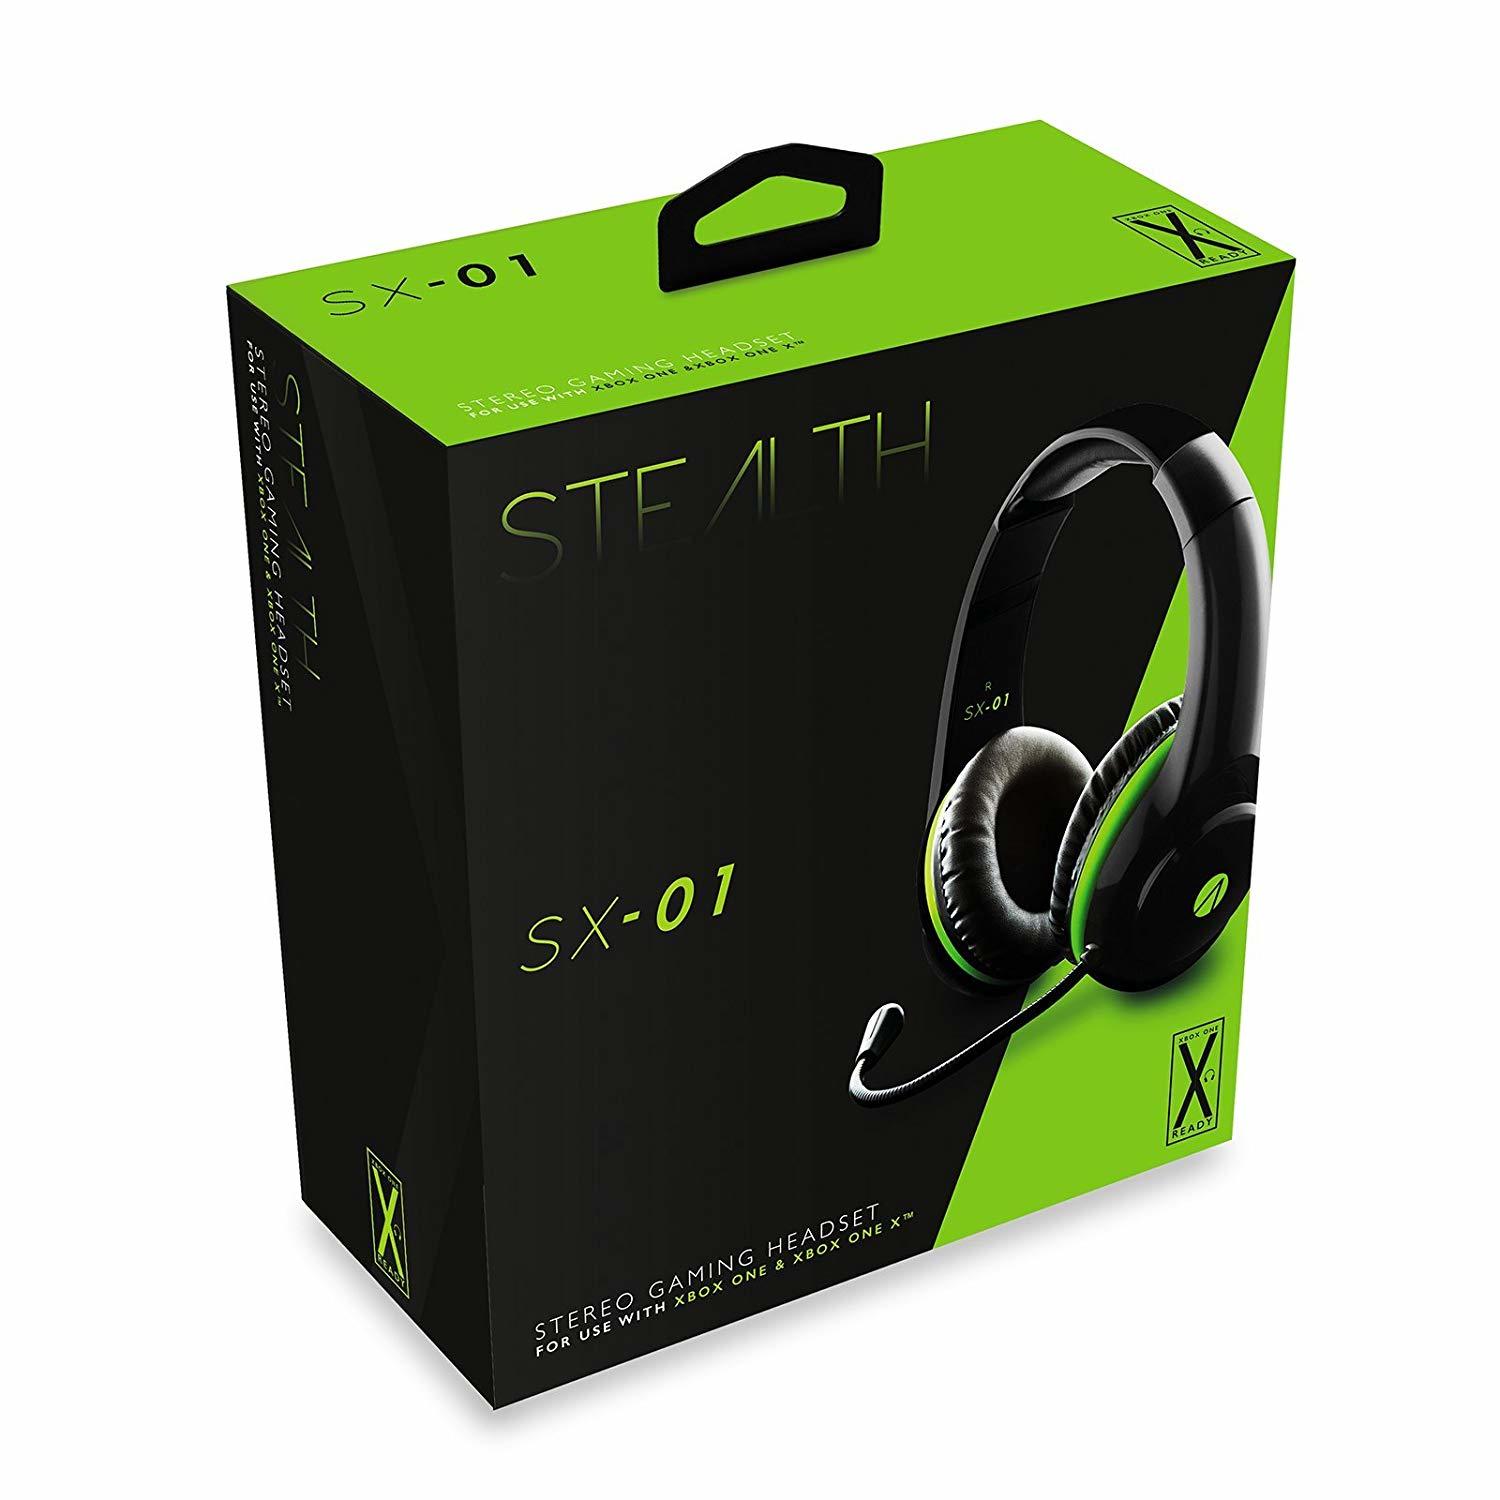 Stealth (Xbox SX01 Stereo Headset One) Gaming